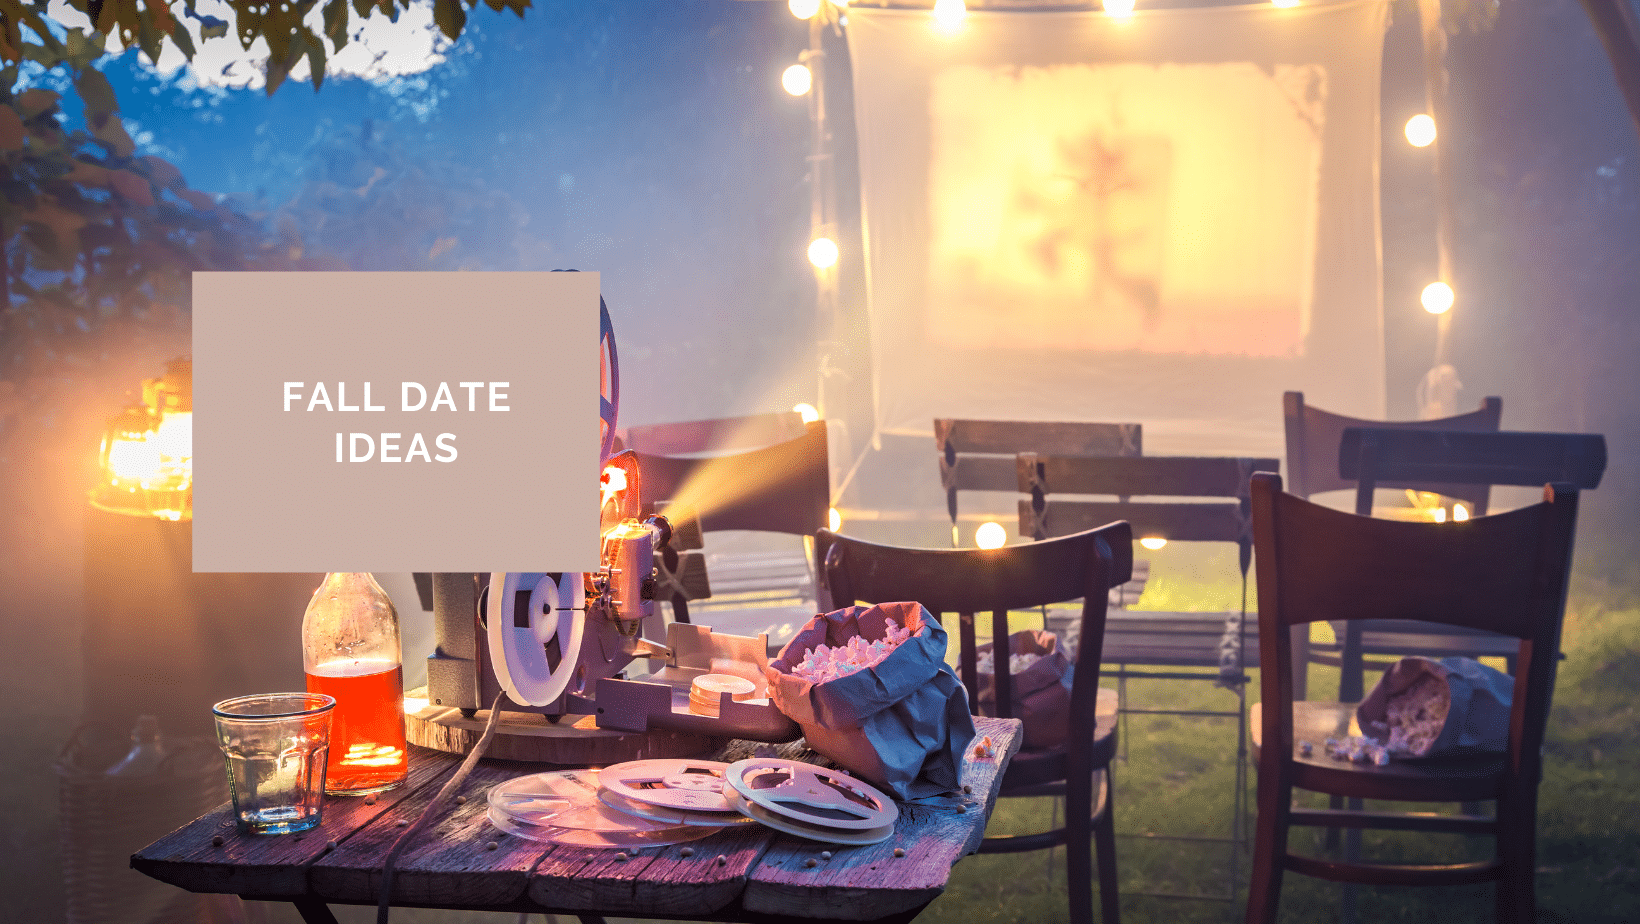 Sitting outside for a movie night is one Fall Date idea!